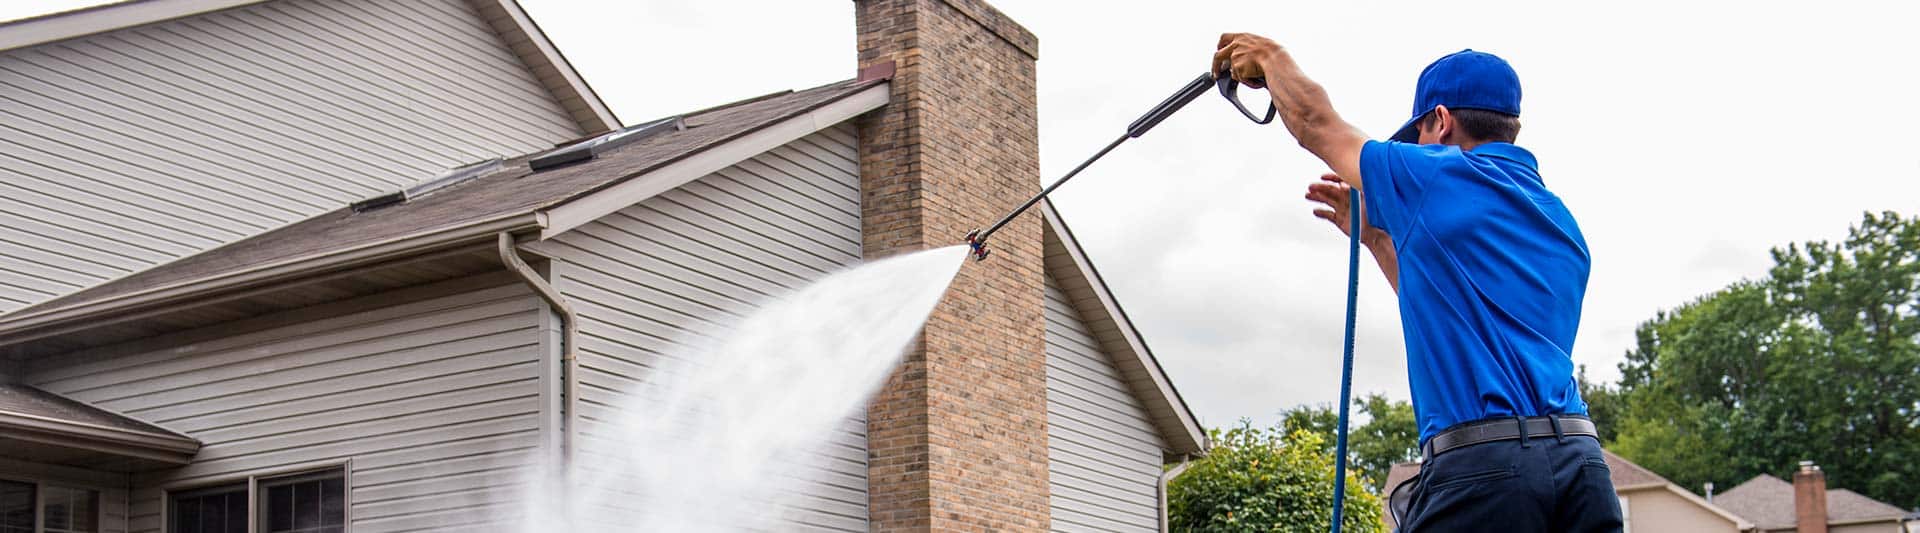 House Washing Services in Hope AR